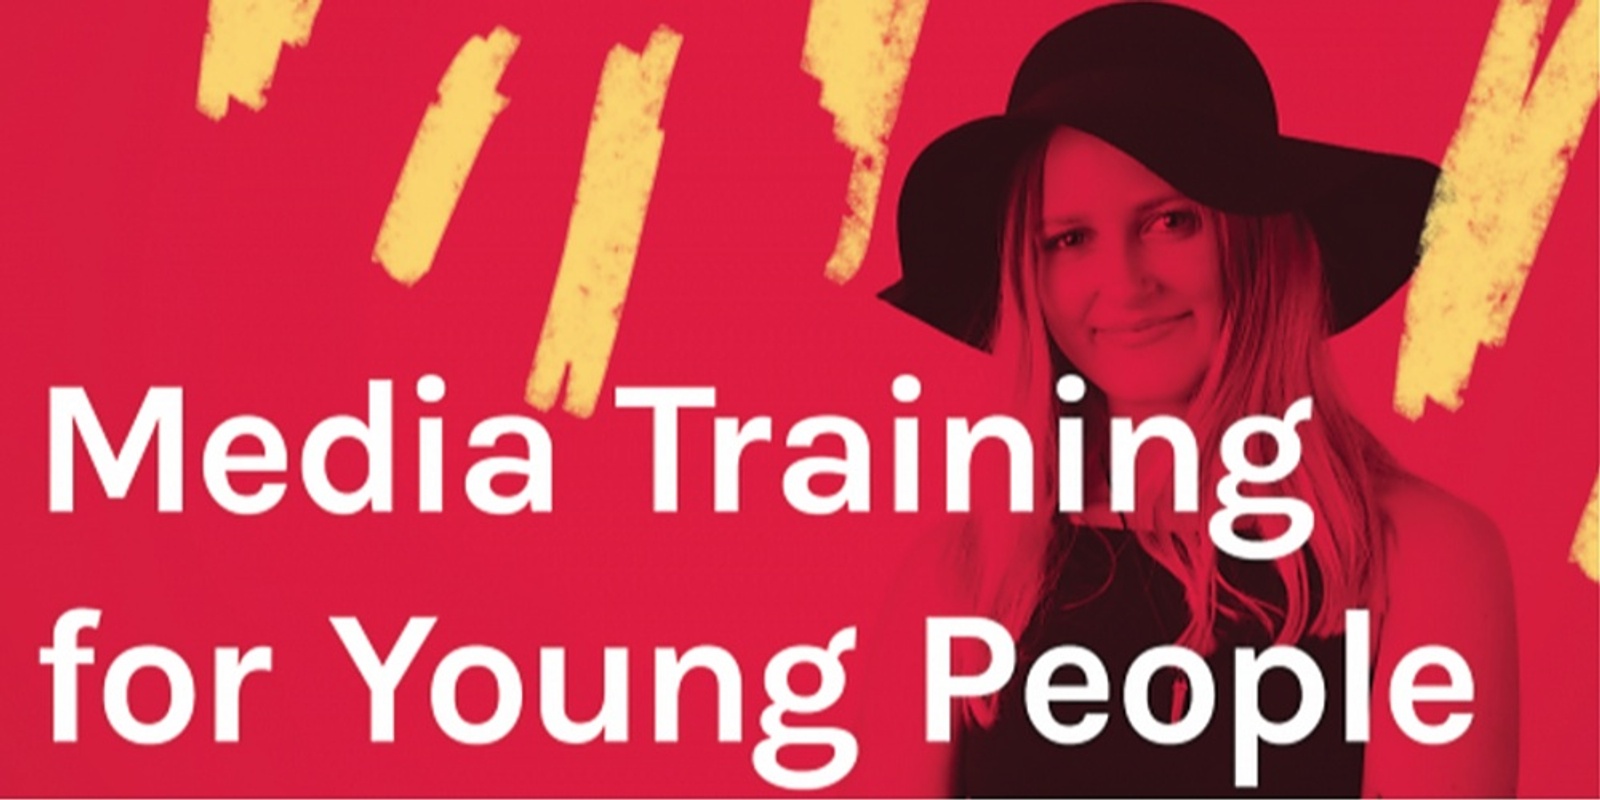 Banner image for Yarra Ranges Council: Media Training For Young People